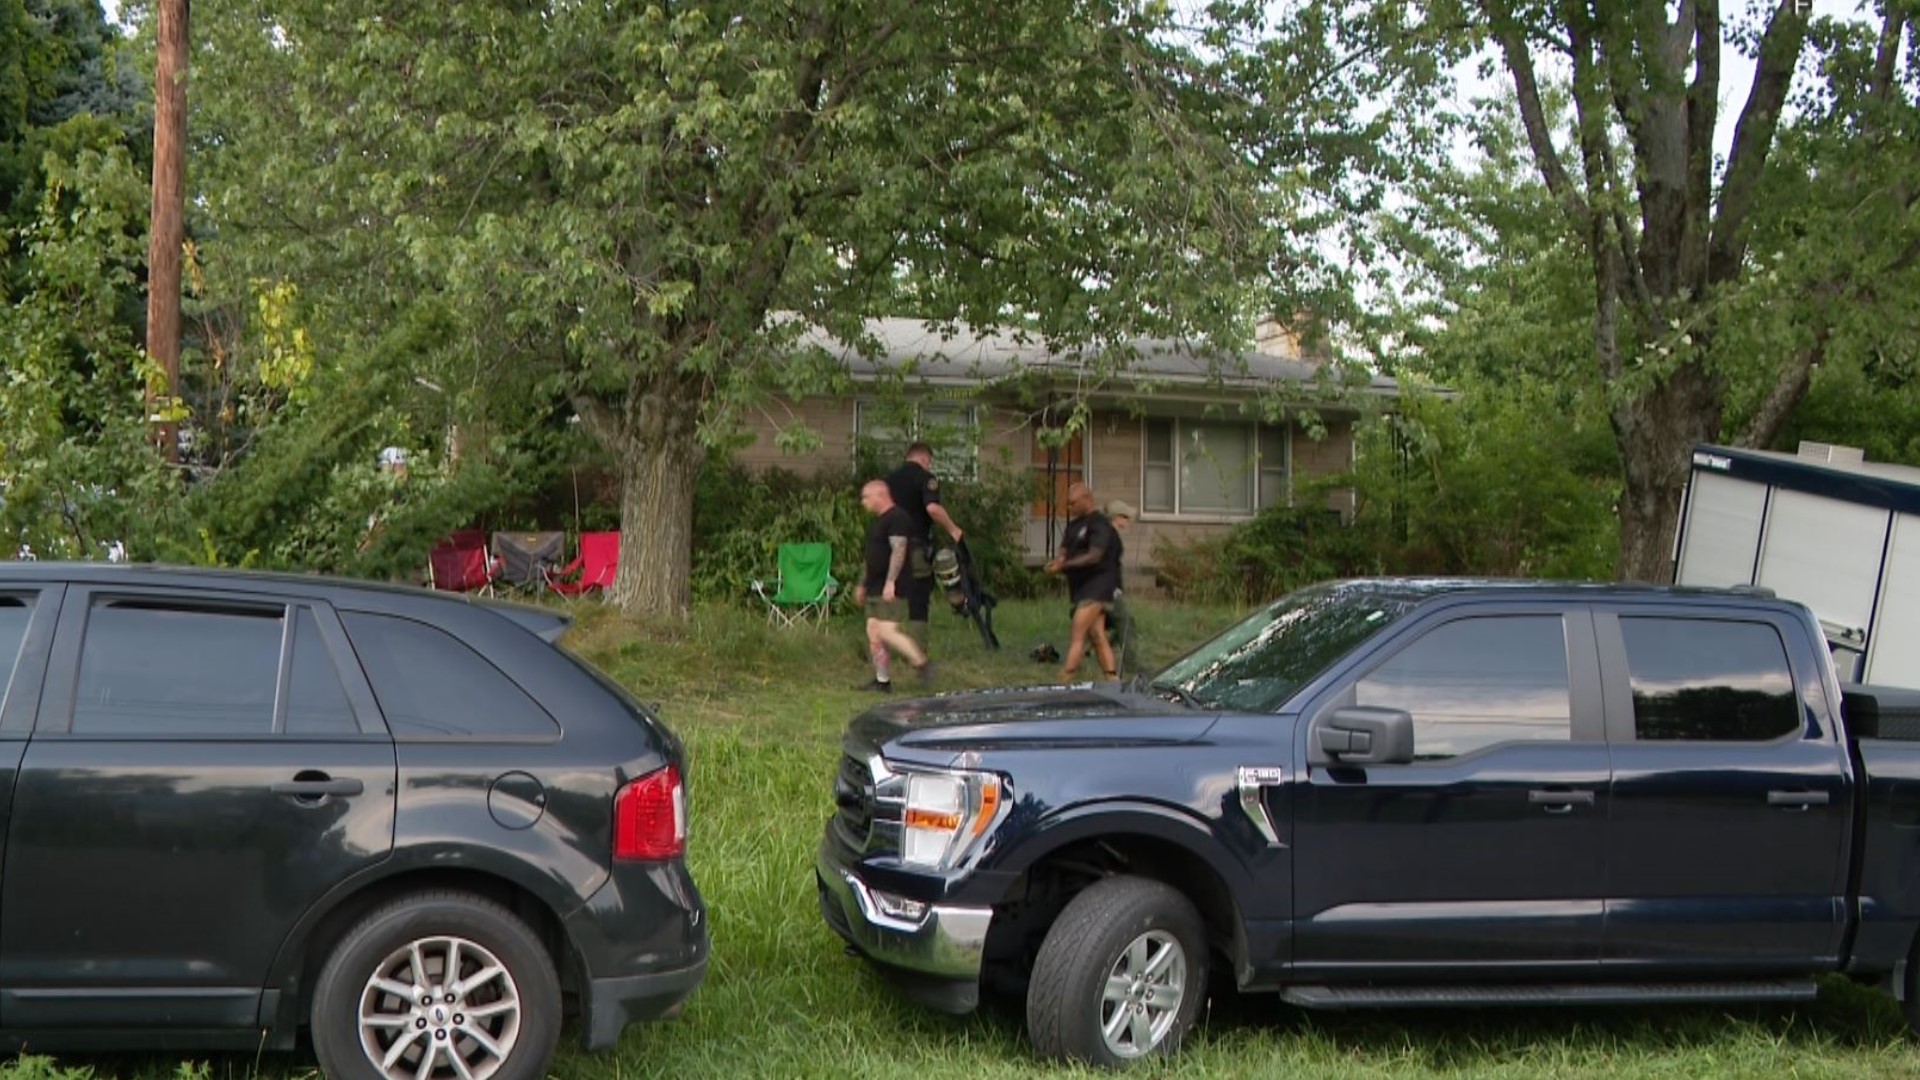 Last week, LMPD searched 6211 and 6213 Applegate Lane after several citizen's tips that hazardous materials, including potential explosives, may be present.